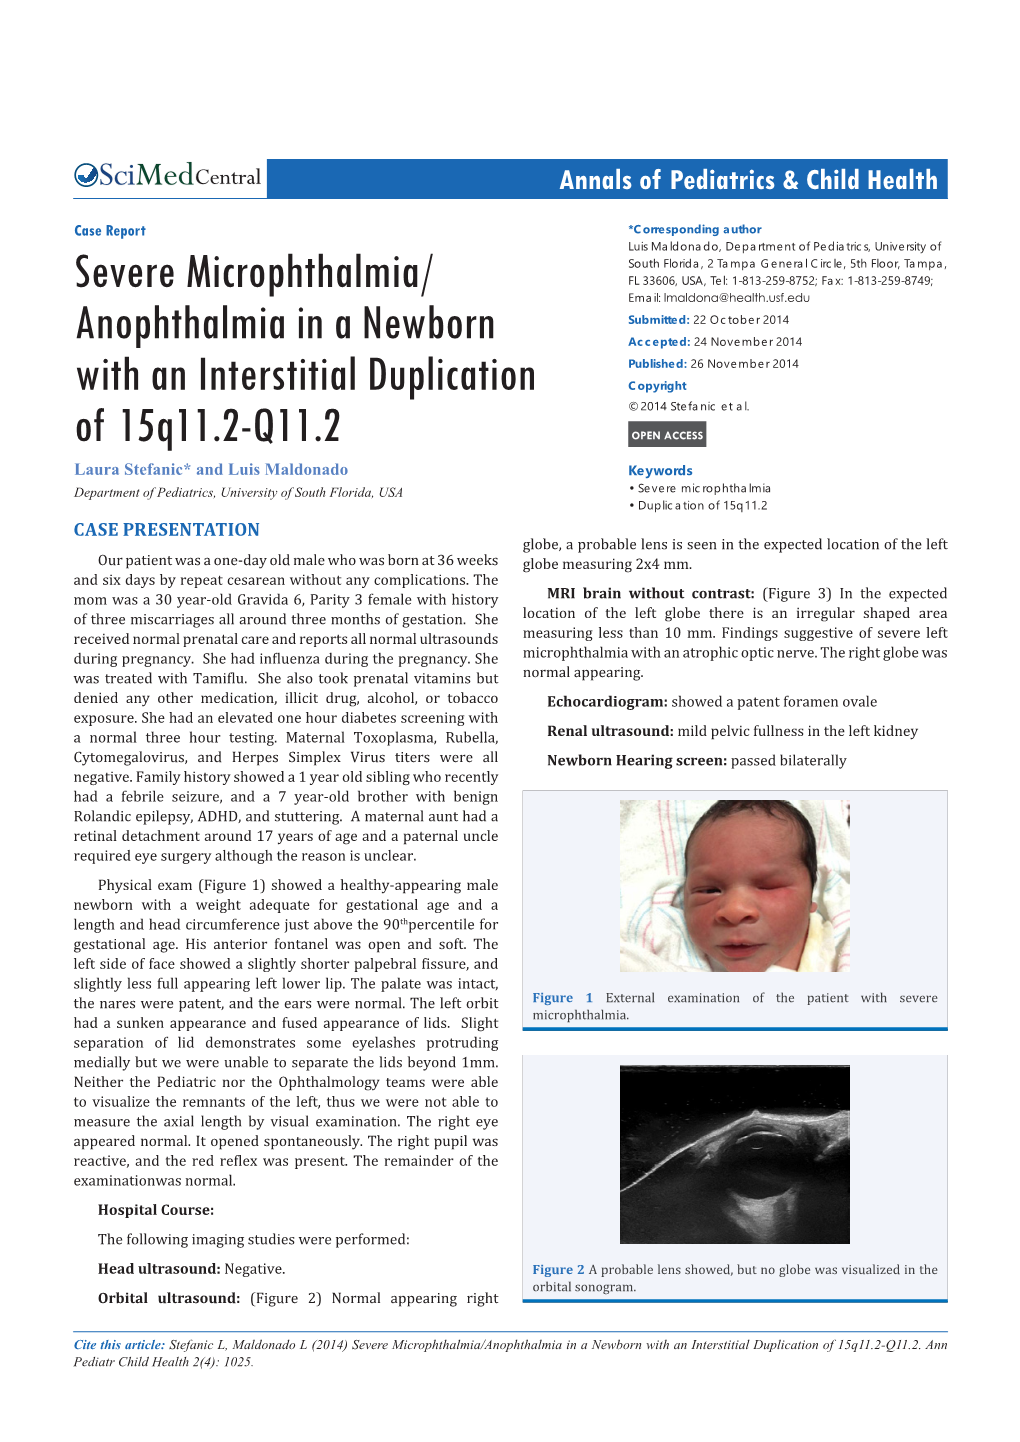 Severe Microphthalmia/Anophthalmia in a Newborn with an Interstitial Duplication of 15Q11.2-Q11.2